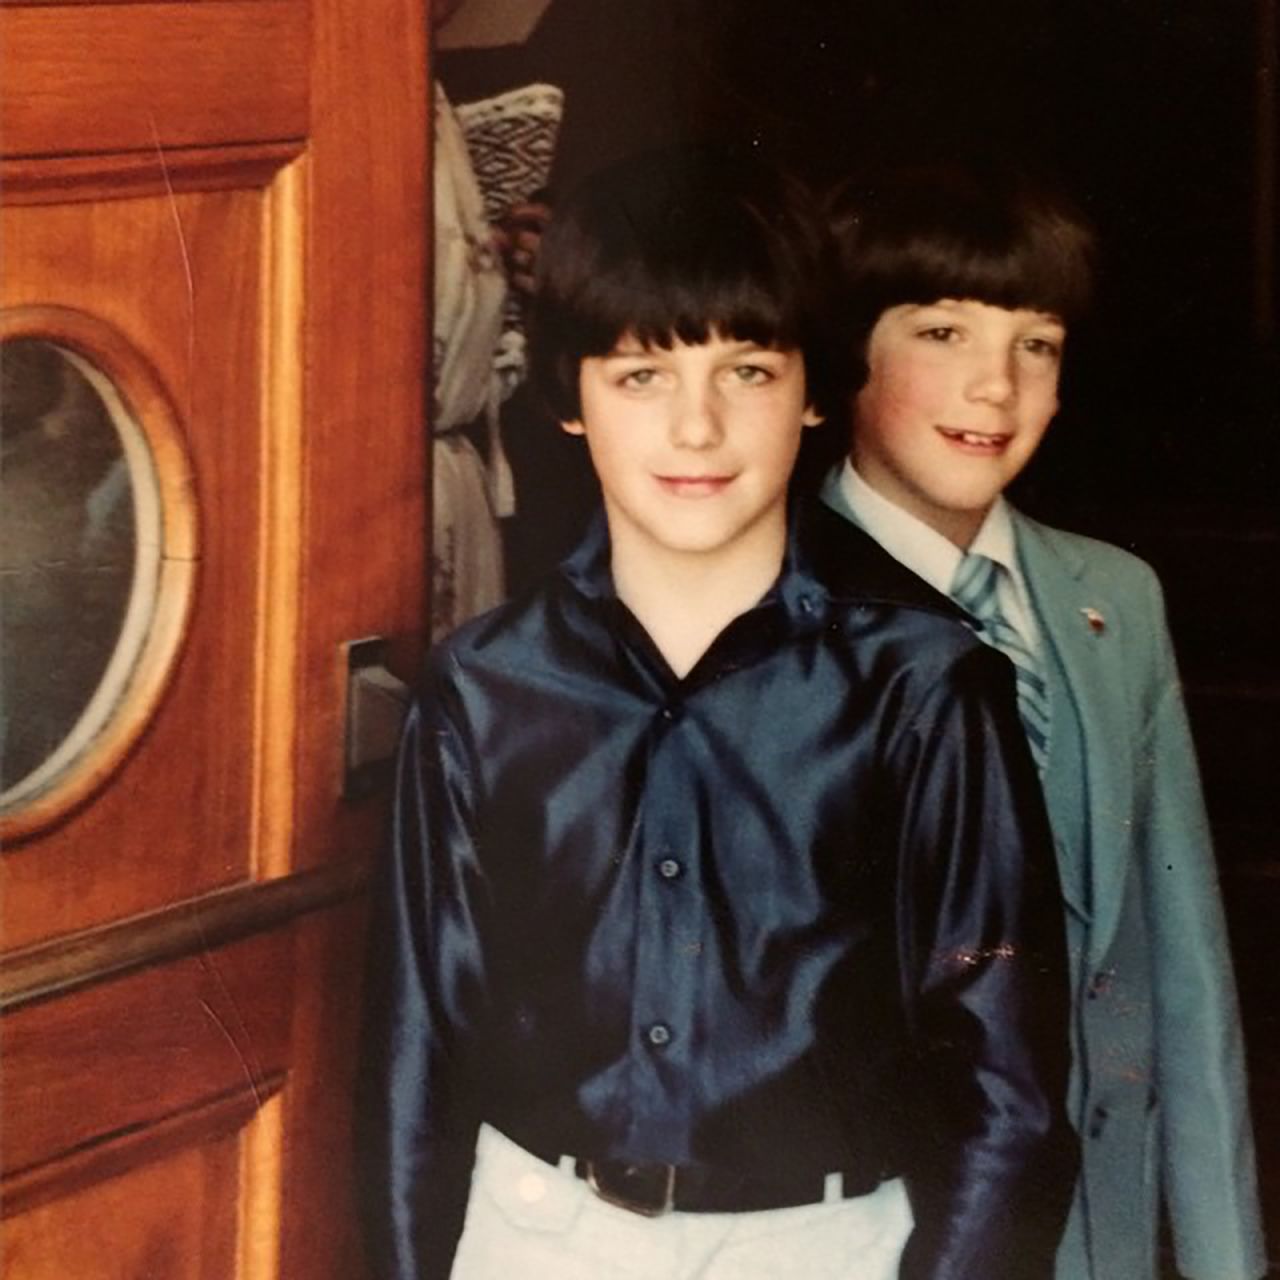 Ryan posted this old photo of him and his brother Al to Facebook in 2015. "Throwback Thursday to my brother Al and I at my First Holy Communion Mass," <a href="https://www.facebook.com/pg/timryan/photos/?tab=album&album_id=435001832865&ref=page_internal" target="_blank" target="_blank">he wrote.</a>